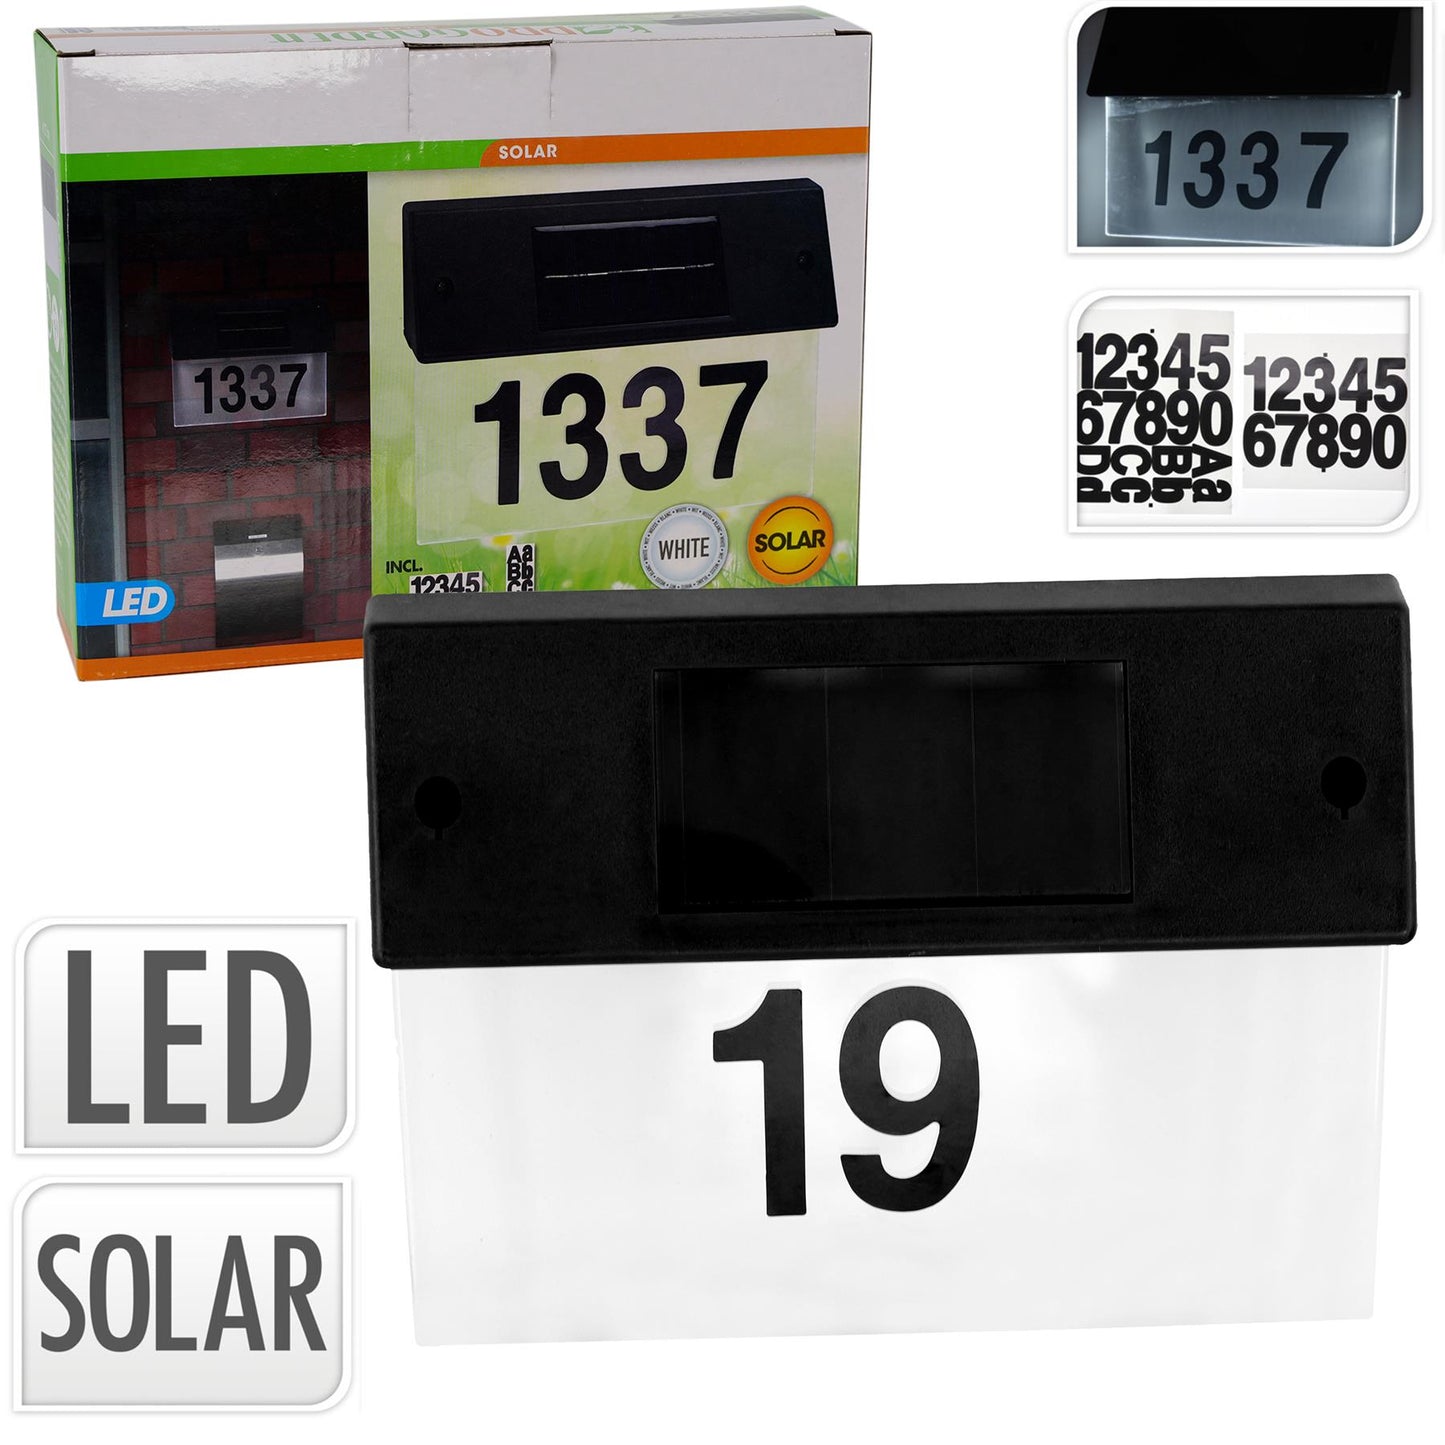 Solar LED House Number Plate Door Sign by Geezy - UKBuyZone